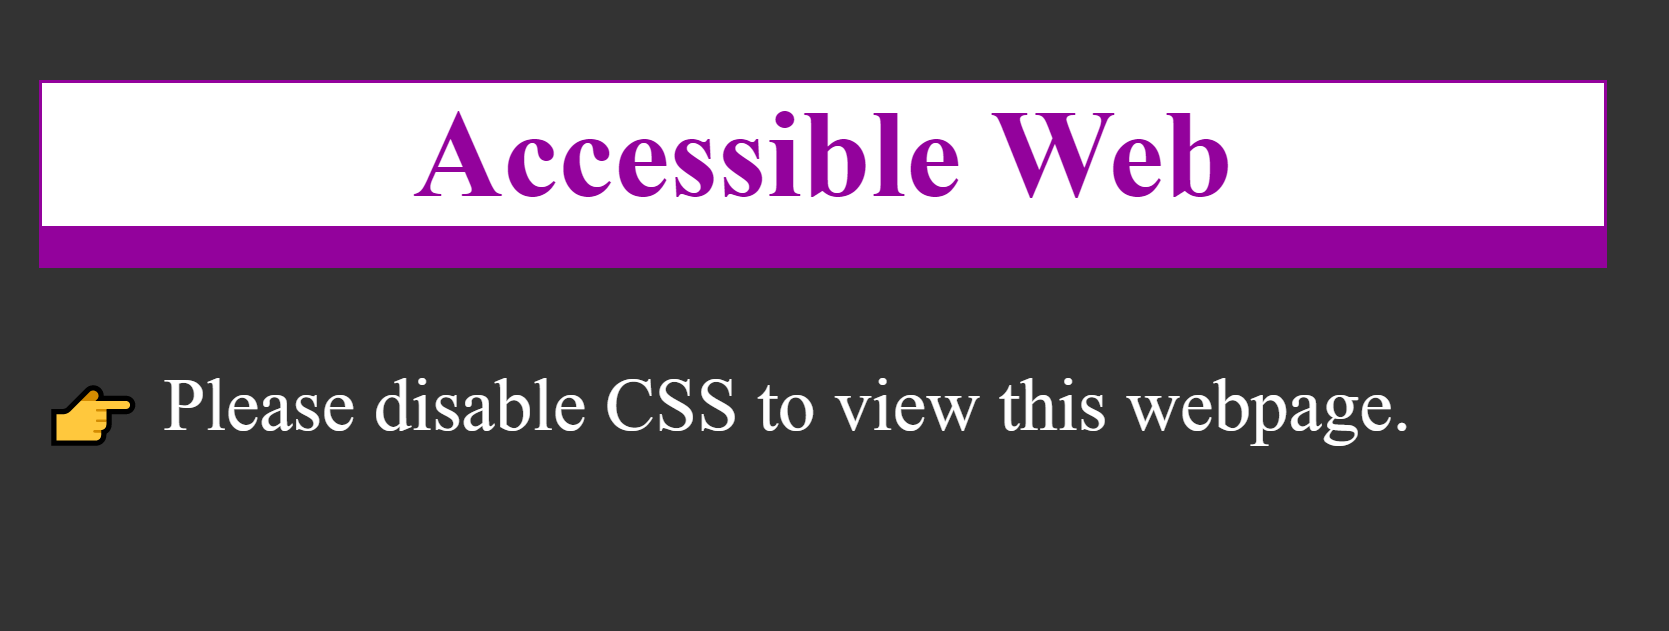 A webpage with the heading Accessible Web followed by the text please disable CSS to view this webpage